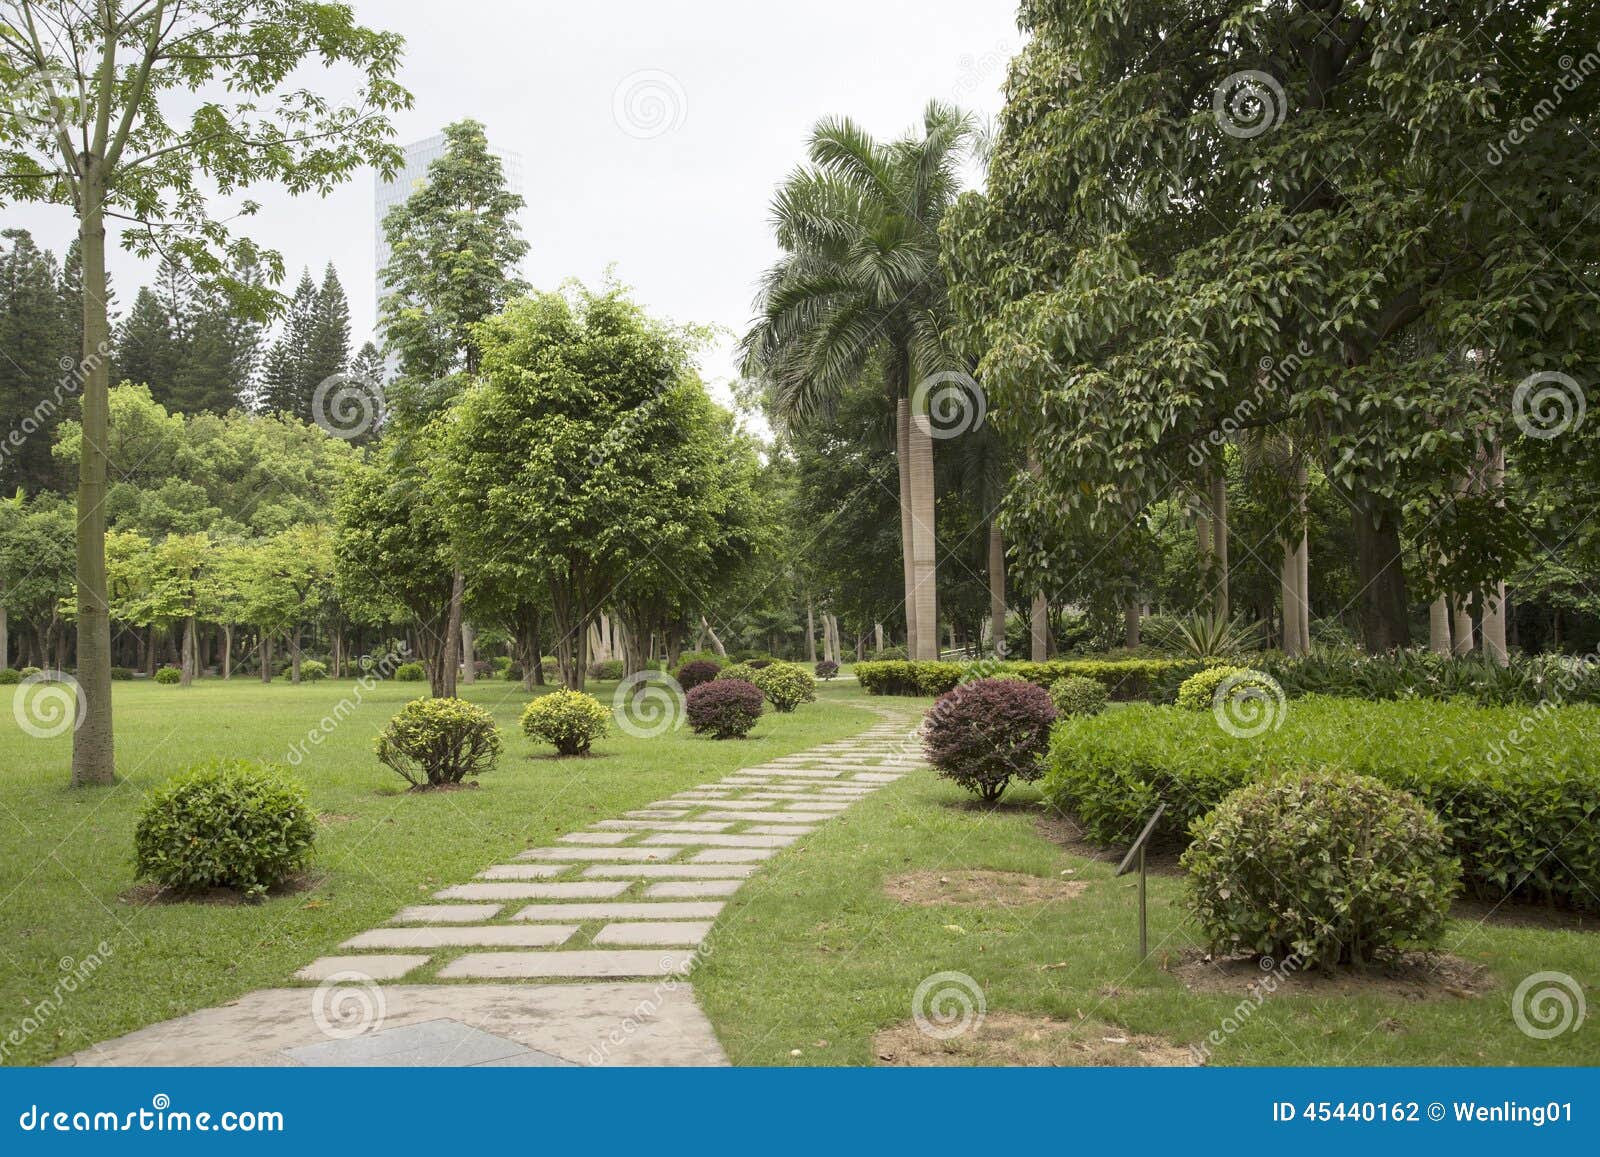 Beautiful Park in the City Background Stock Photo - Image of growing,  landscapes: 45440162